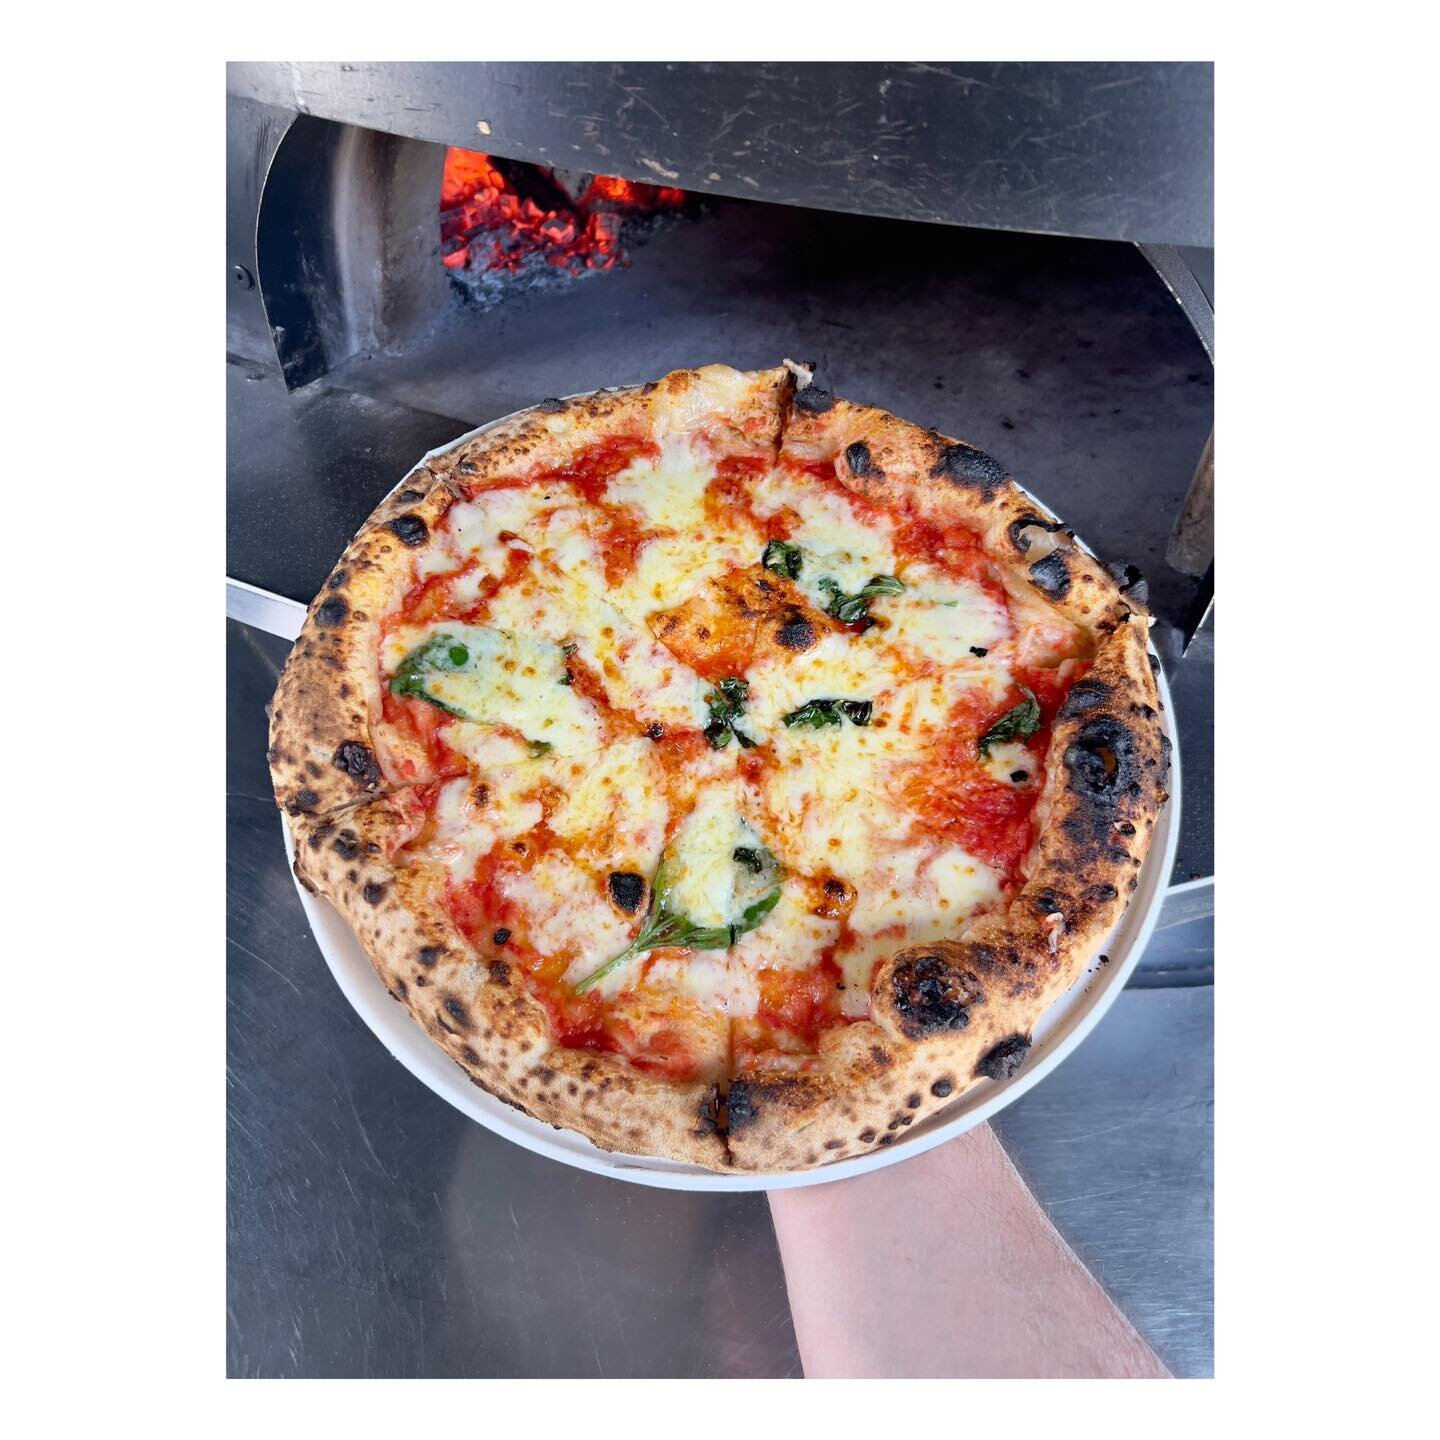 It's Monday and we meant to post a picture of a Margherita!

Now that we've got your attention&hellip; Can&rsquo;t decide what to do this Easter weekend? Come say hi and grab a pizza at @lostpier_shop_and_tap in Burgess Hill this Saturday! We will be